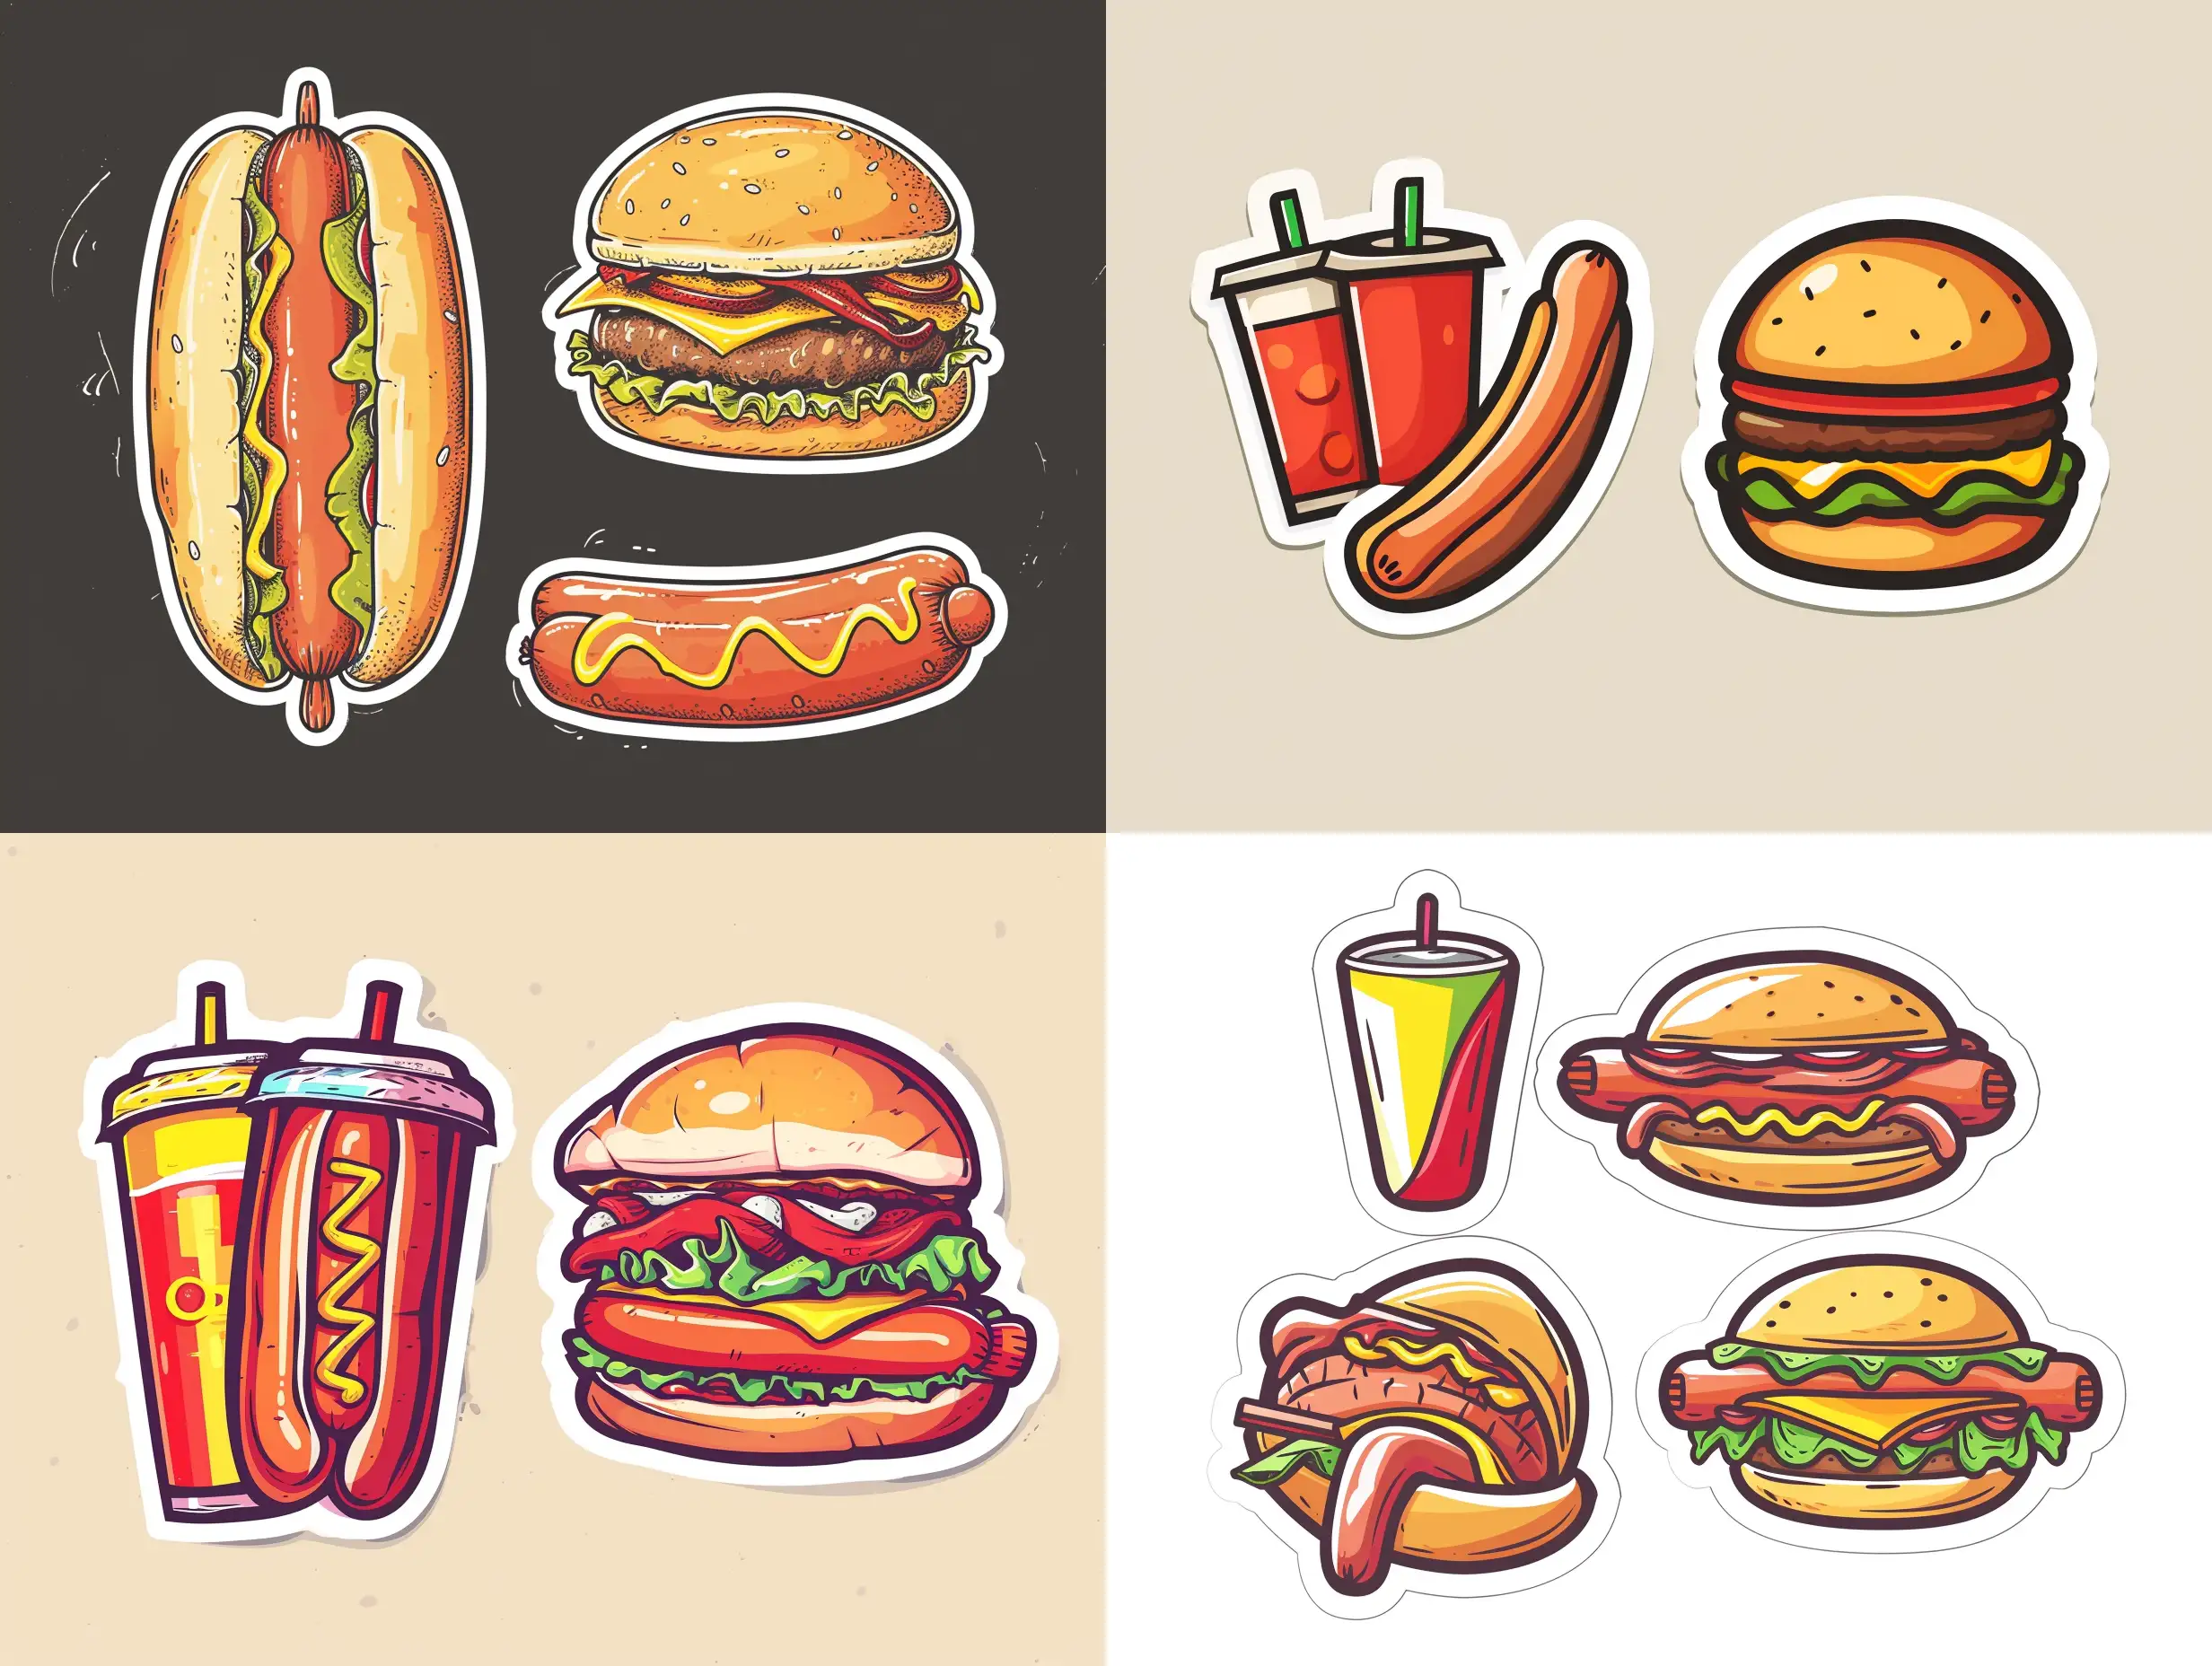 Delicious-Fast-Food-Feast-Hot-Dog-Hamburger-and-Soft-Drinks-Logo